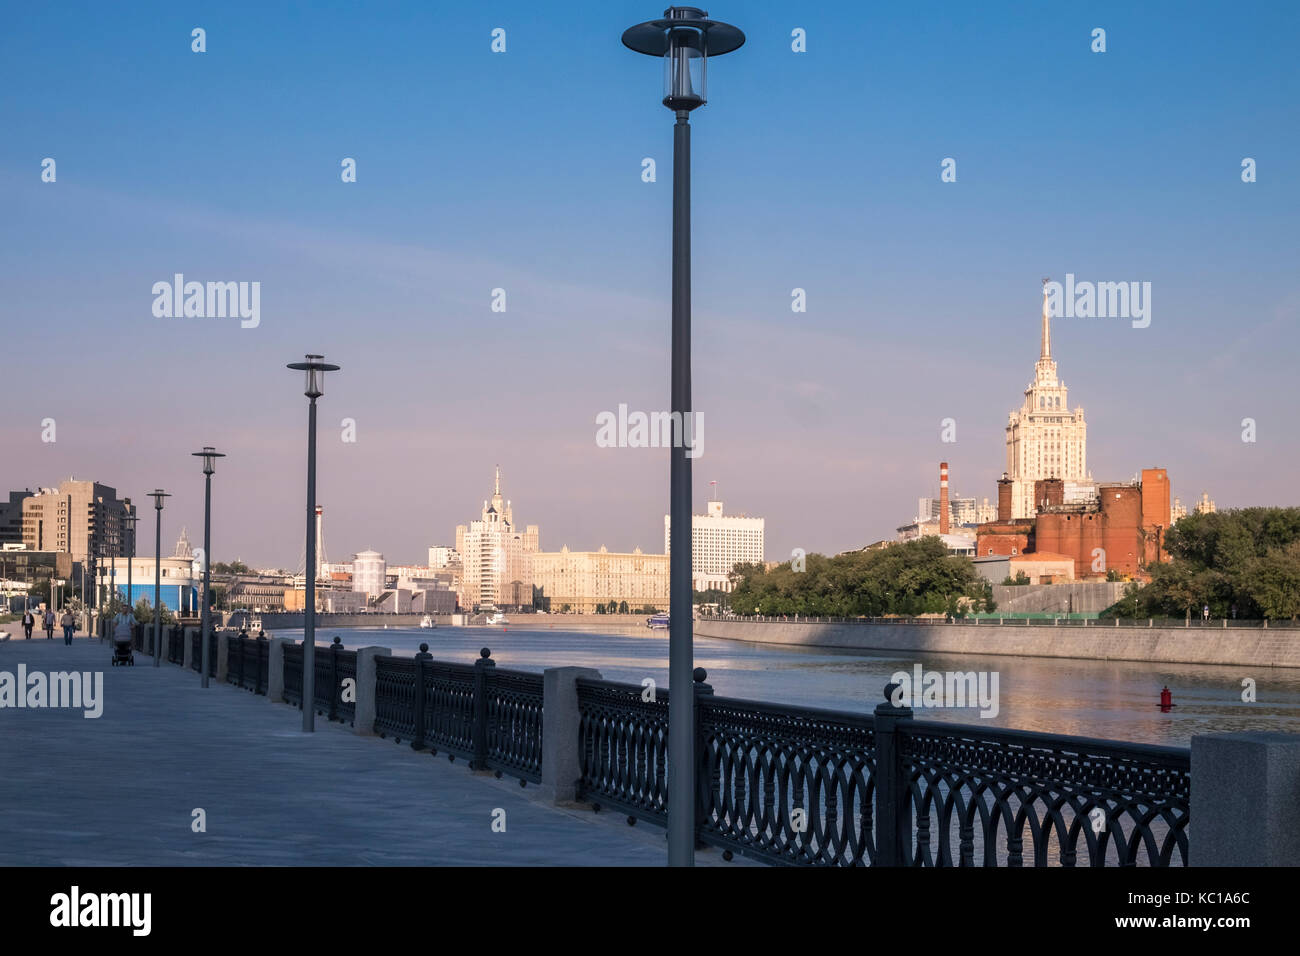 View along the Moskva River, Moscow, Russia, including the landmark 5 star Radisson Royal Hotel. Stock Photo